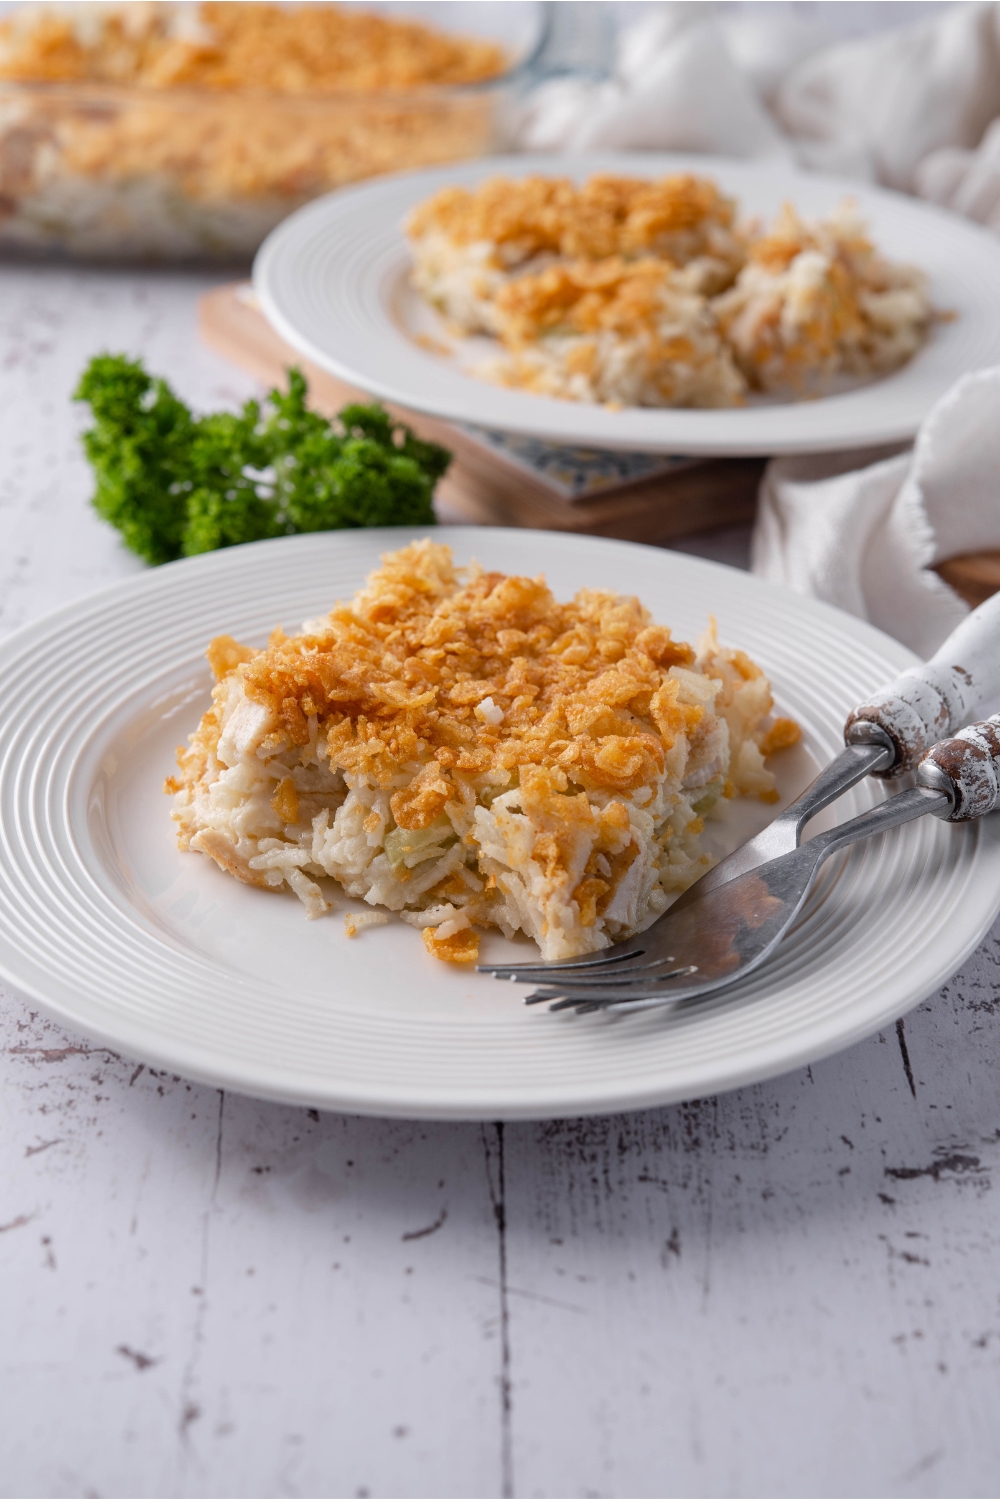 A plate with a serving of rotisserie chicken casserole topped with crushed cornflakes. There is a fork on the plate and a second serving of casserole in the background.